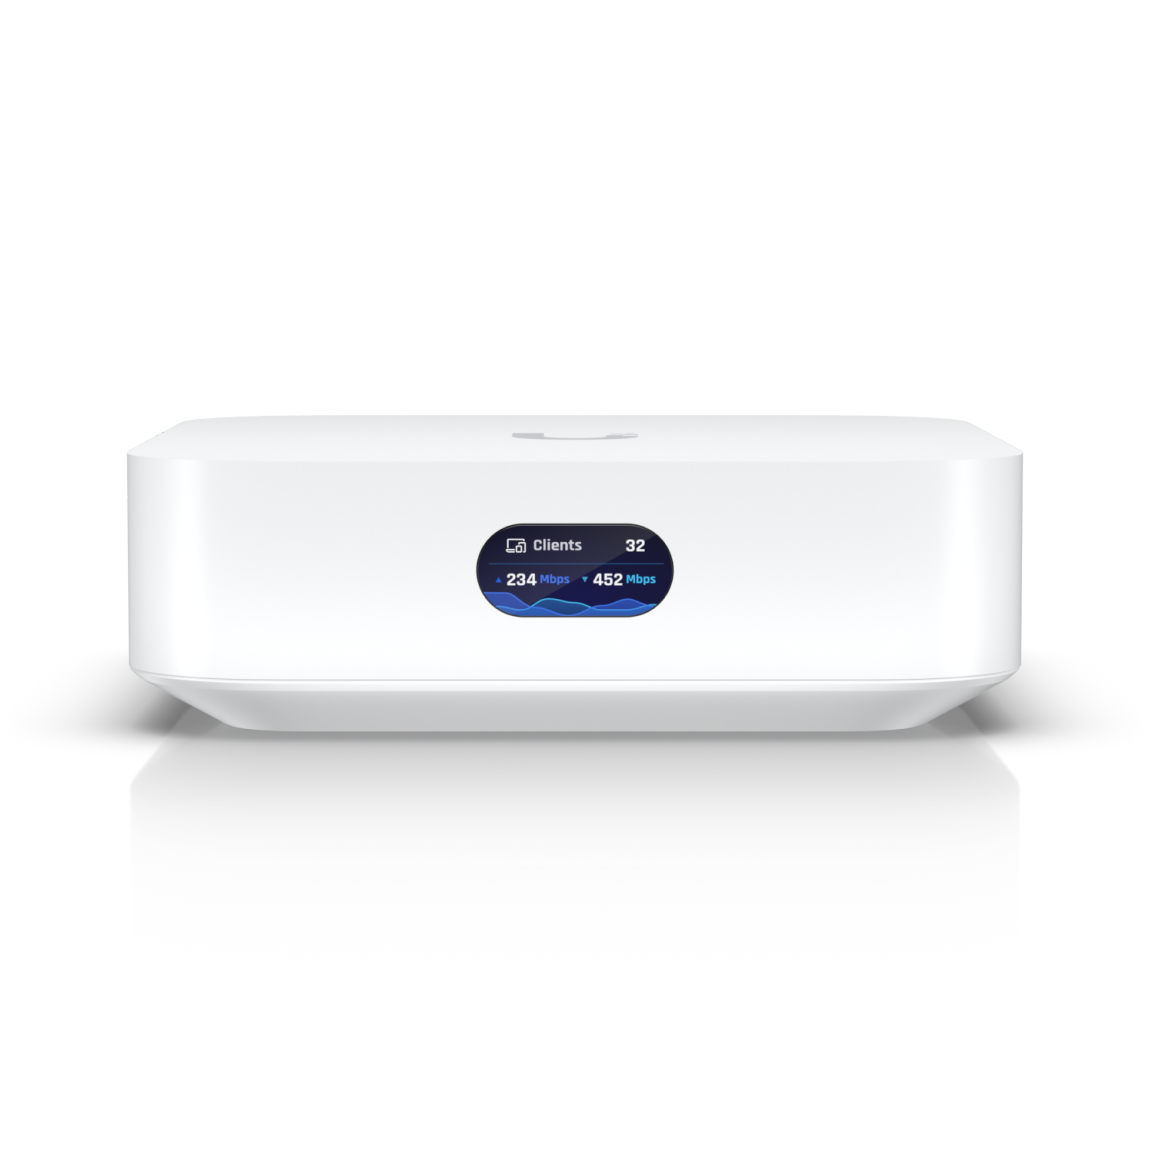 New UniFi Express  Smallest Device with Special Features 